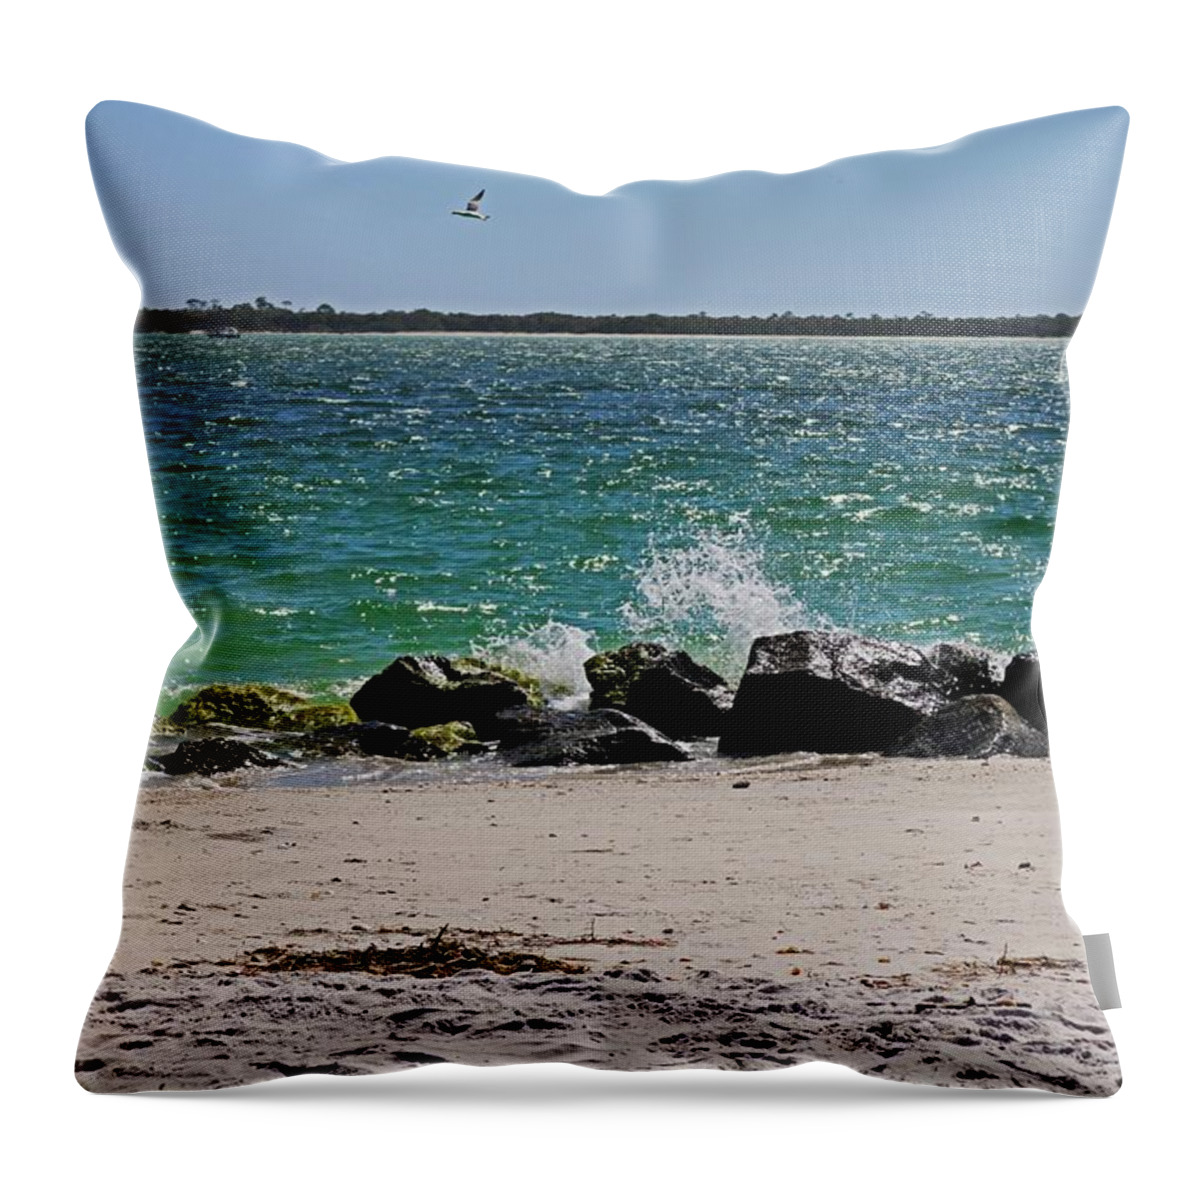 Teal Throw Pillow featuring the photograph Teal Rapture by Michiale Schneider